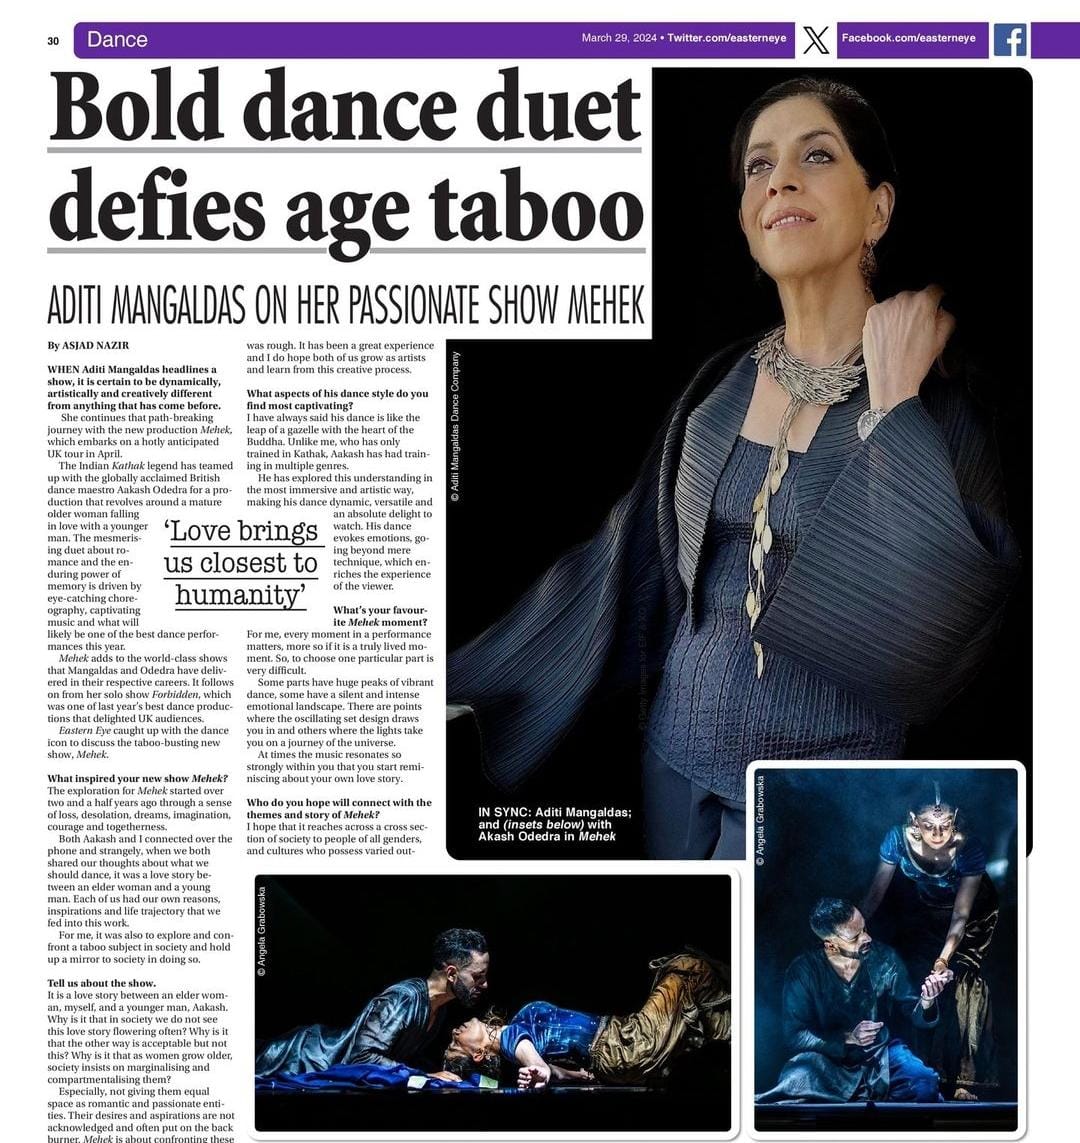 '@AditiMangaldas’ bold dance duet defies age taboo! MEHEK adds to the world-class shows that Mangaldas & Odedra have delivered in their respective careers' says @asjadnazir | @EasternEye UK Read easterneye.biz/aditi-mangalda… Thank you Asjad. Looking fwd to seeing U at the London show.